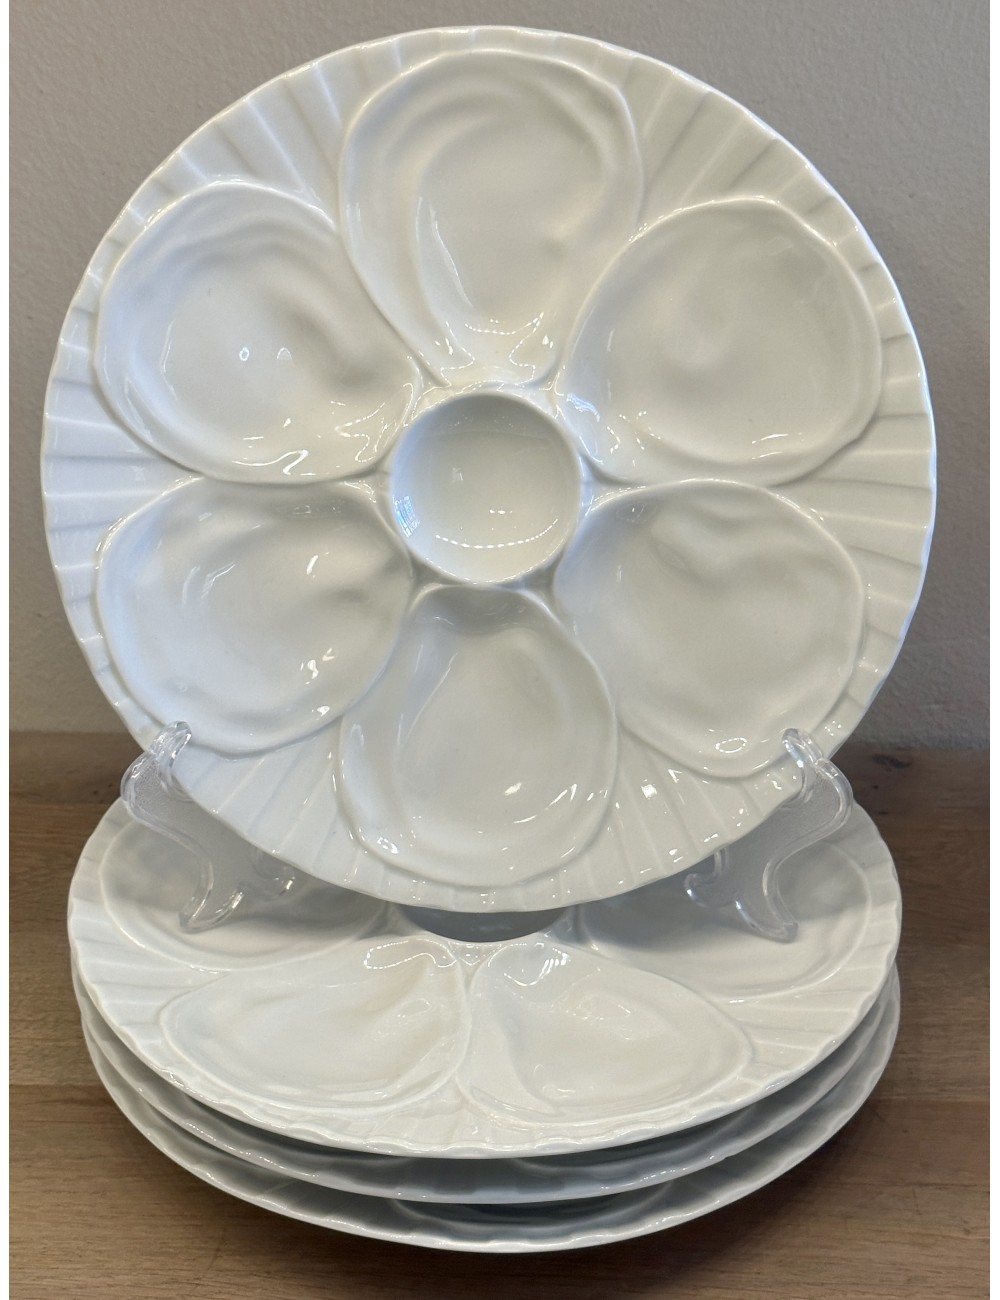 Oyster plate / Plate for oysters - Pillivuyt - executed in white